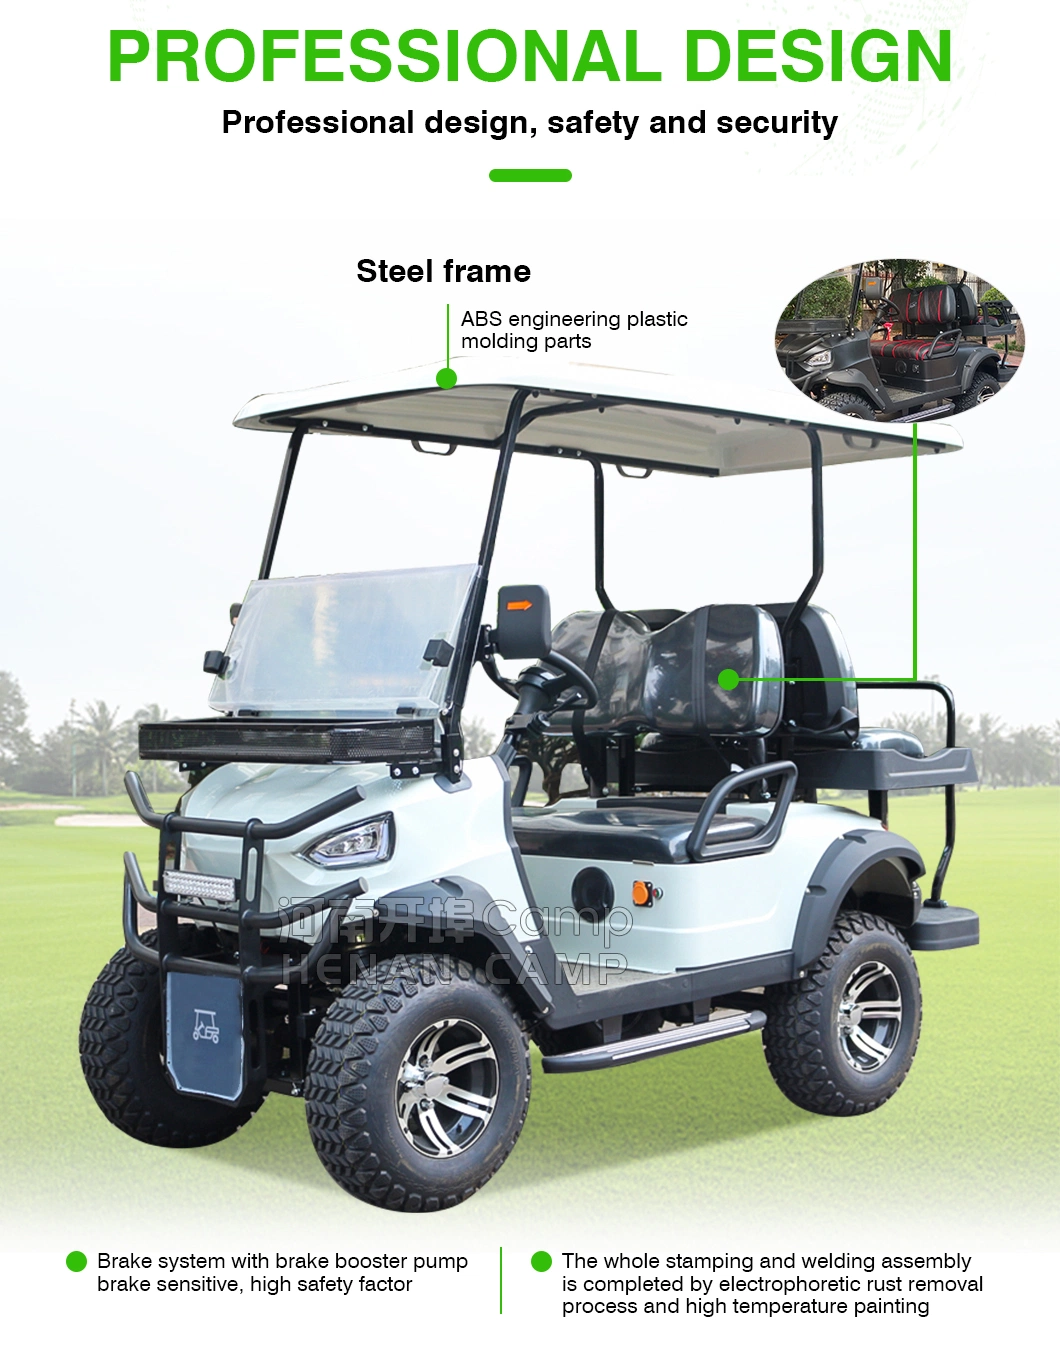 Hot Sale 6 Person 72V Electric Lifted Golf Cart off Road Buggy with Lithium Battery